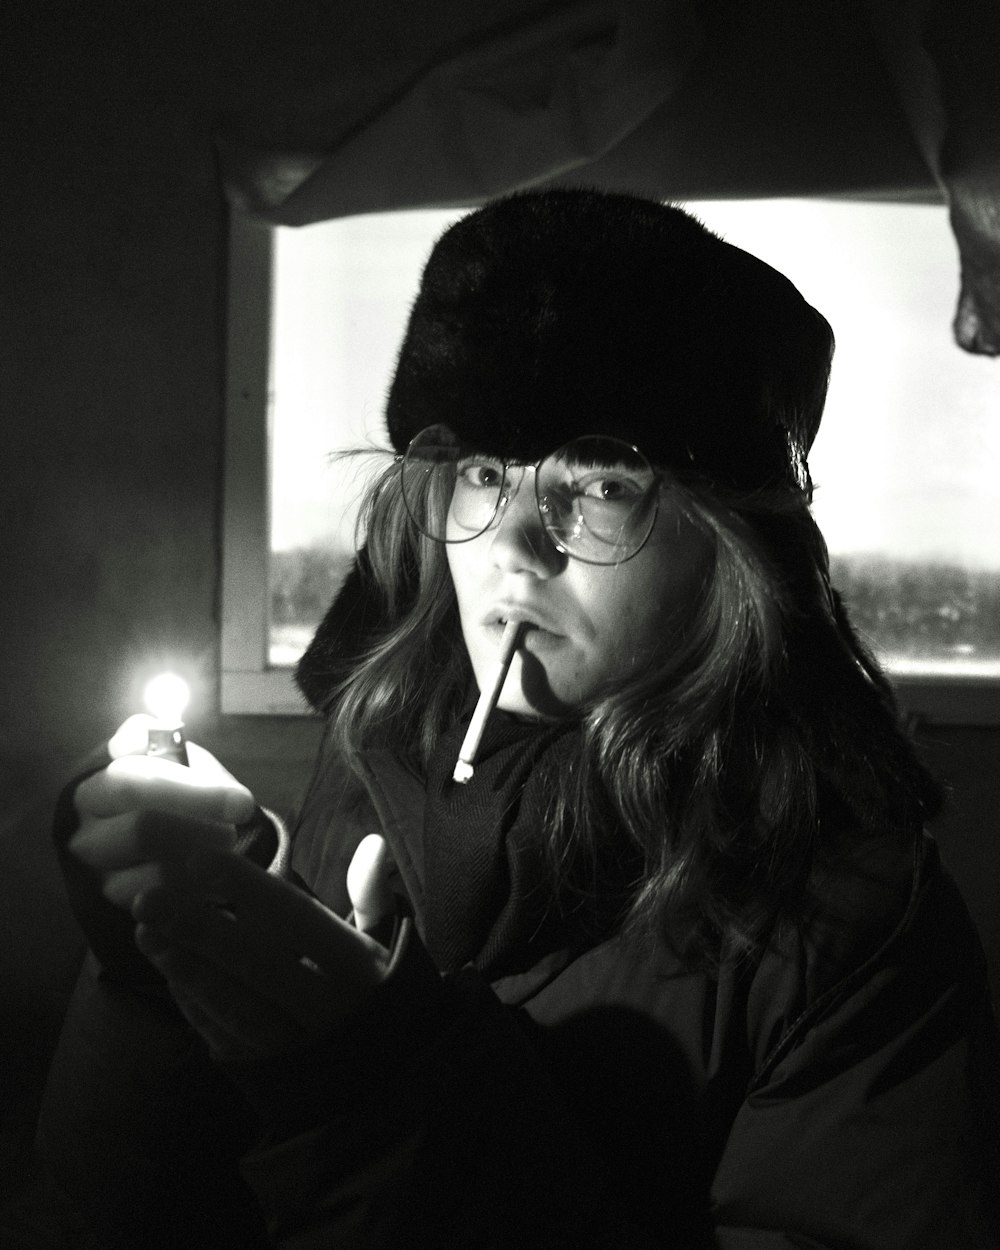 a woman smoking a cigarette while wearing a hat